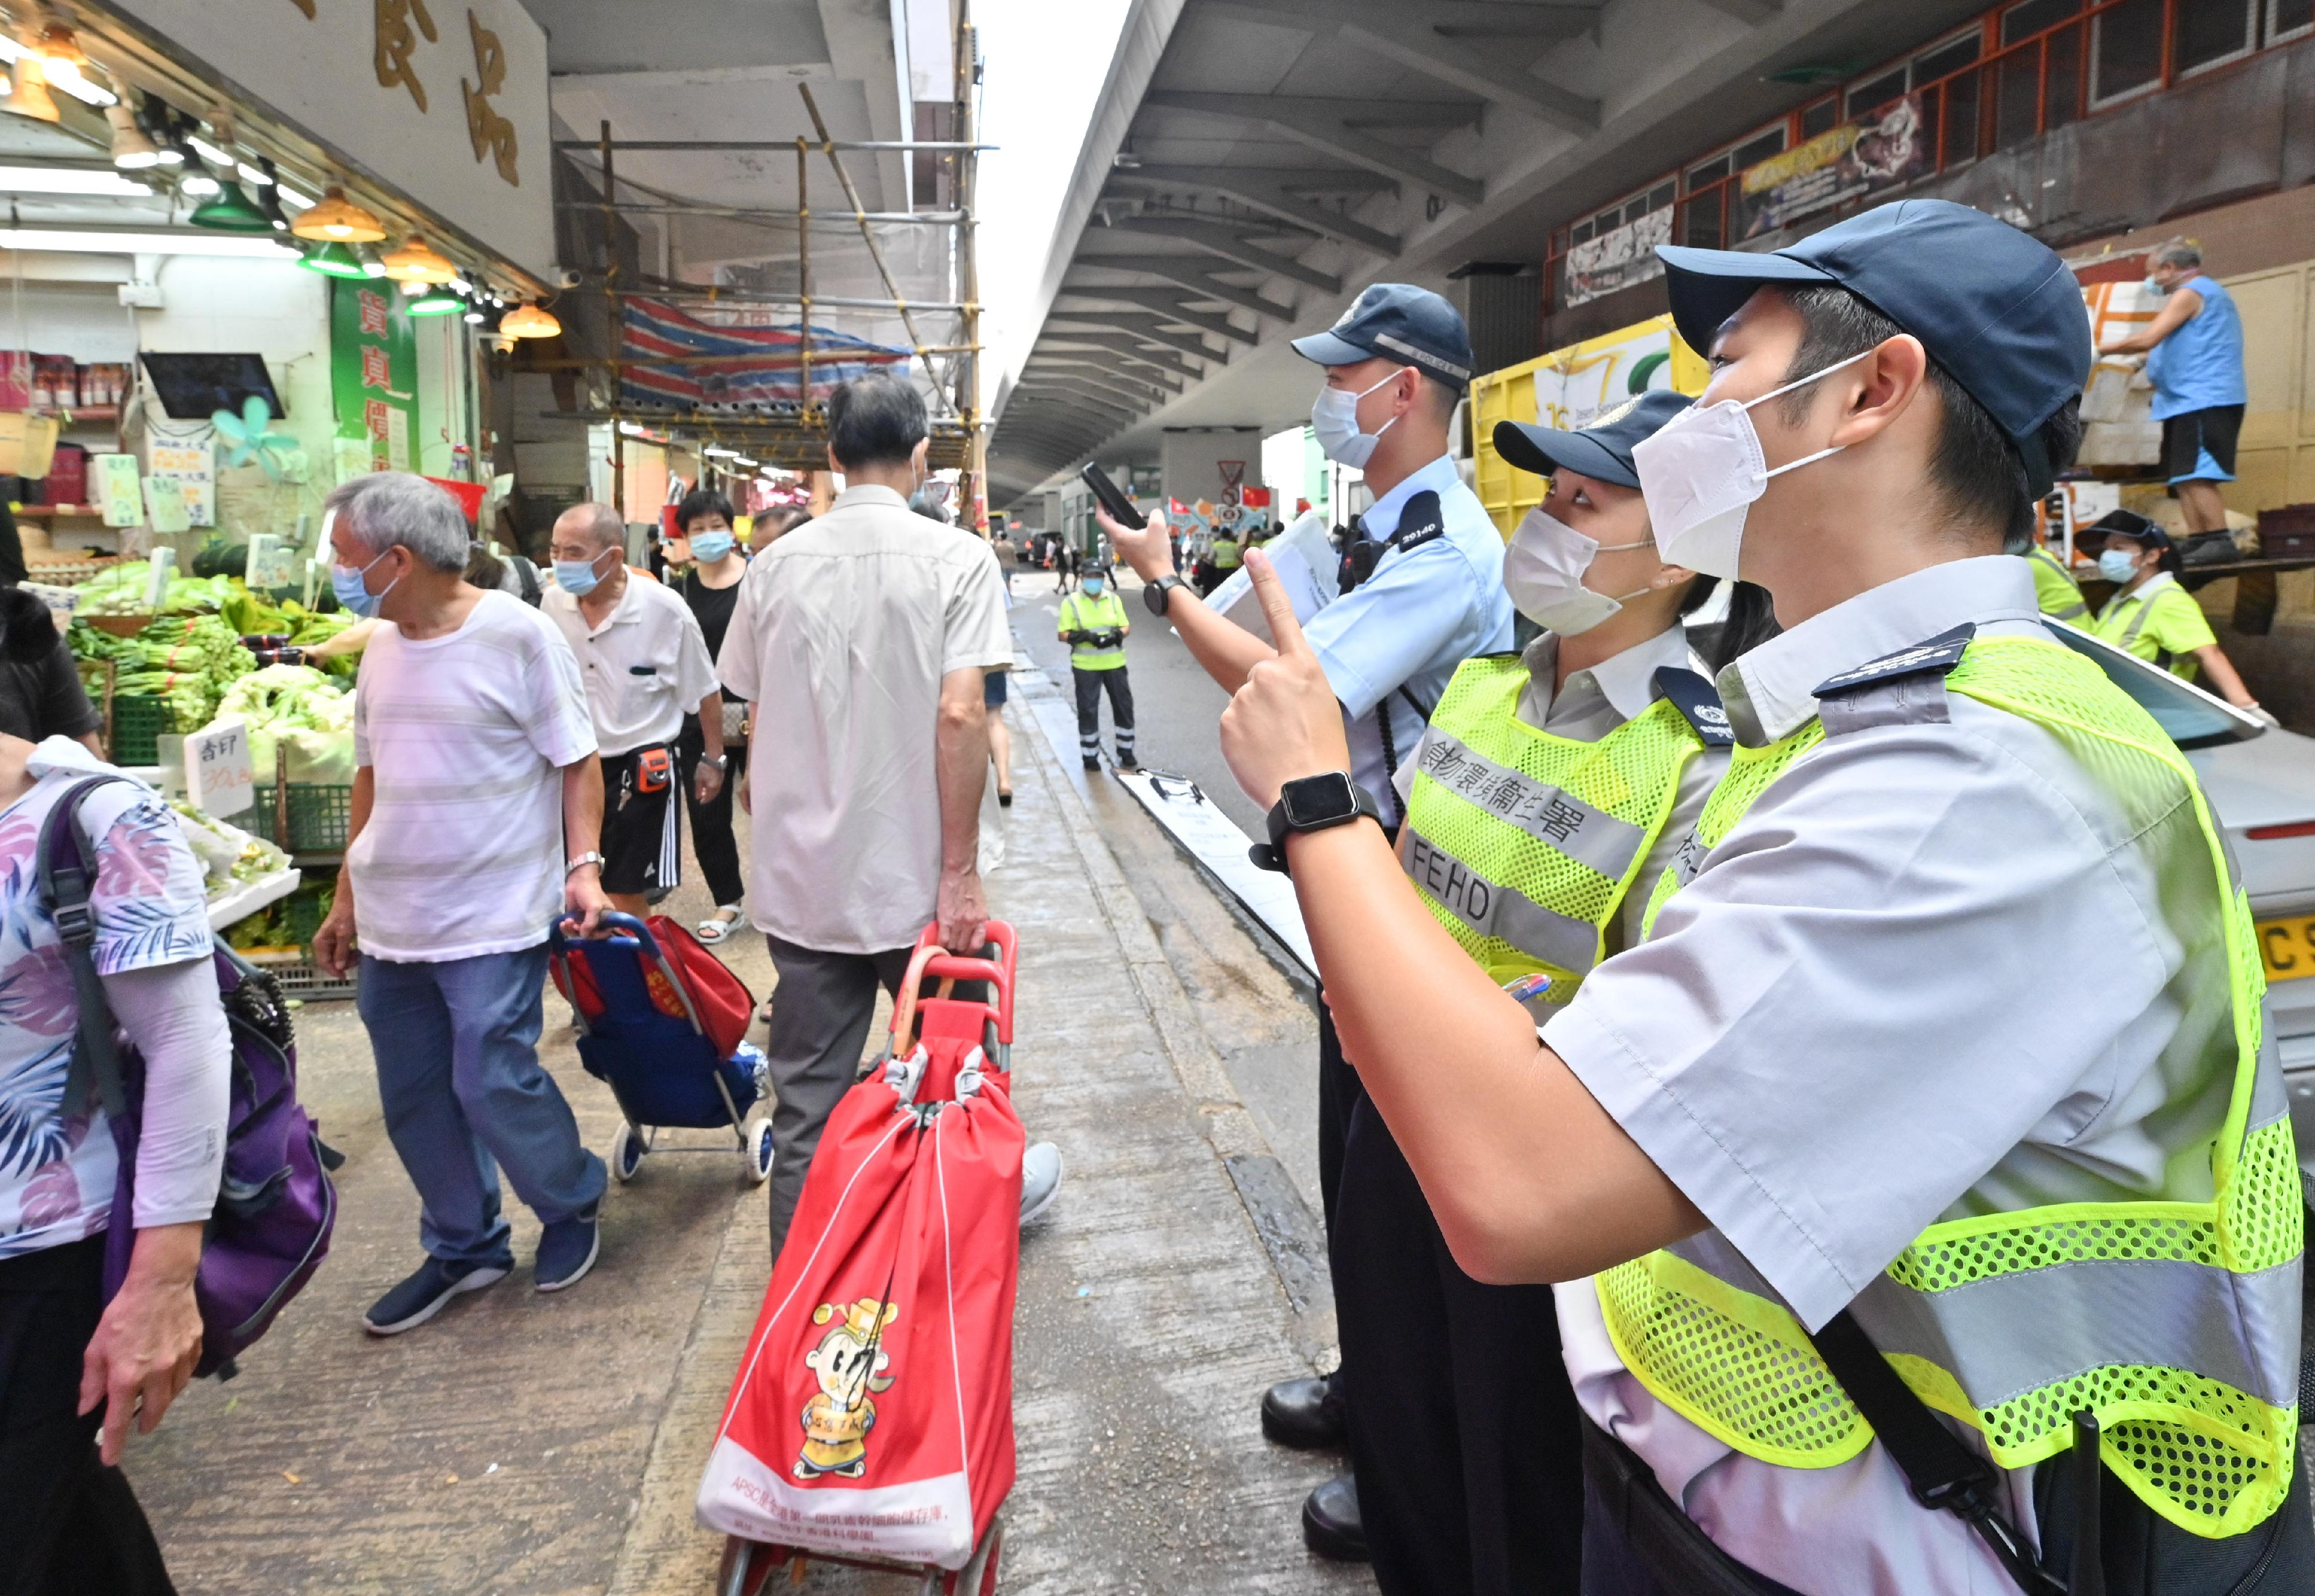 A spokesman for the Food and Environmental Hygiene Department (FEHD) said today (October 5) that the FEHD and the Hong Kong Police Force (the Police) have started a series of stringent enforcement actions since October 3 in which joint operations have been conducted in Kowloon City, Sham Shui Po, Tsuen Wan and Kwun Tong against shop owners and other stakeholders illegally placing goods or articles in public places or on carriageways, thereby causing obstruction to pedestrian and vehicular flow. Photo shows officers of the FEHD and the Police conducting a joint operation in Kowloon City. 
